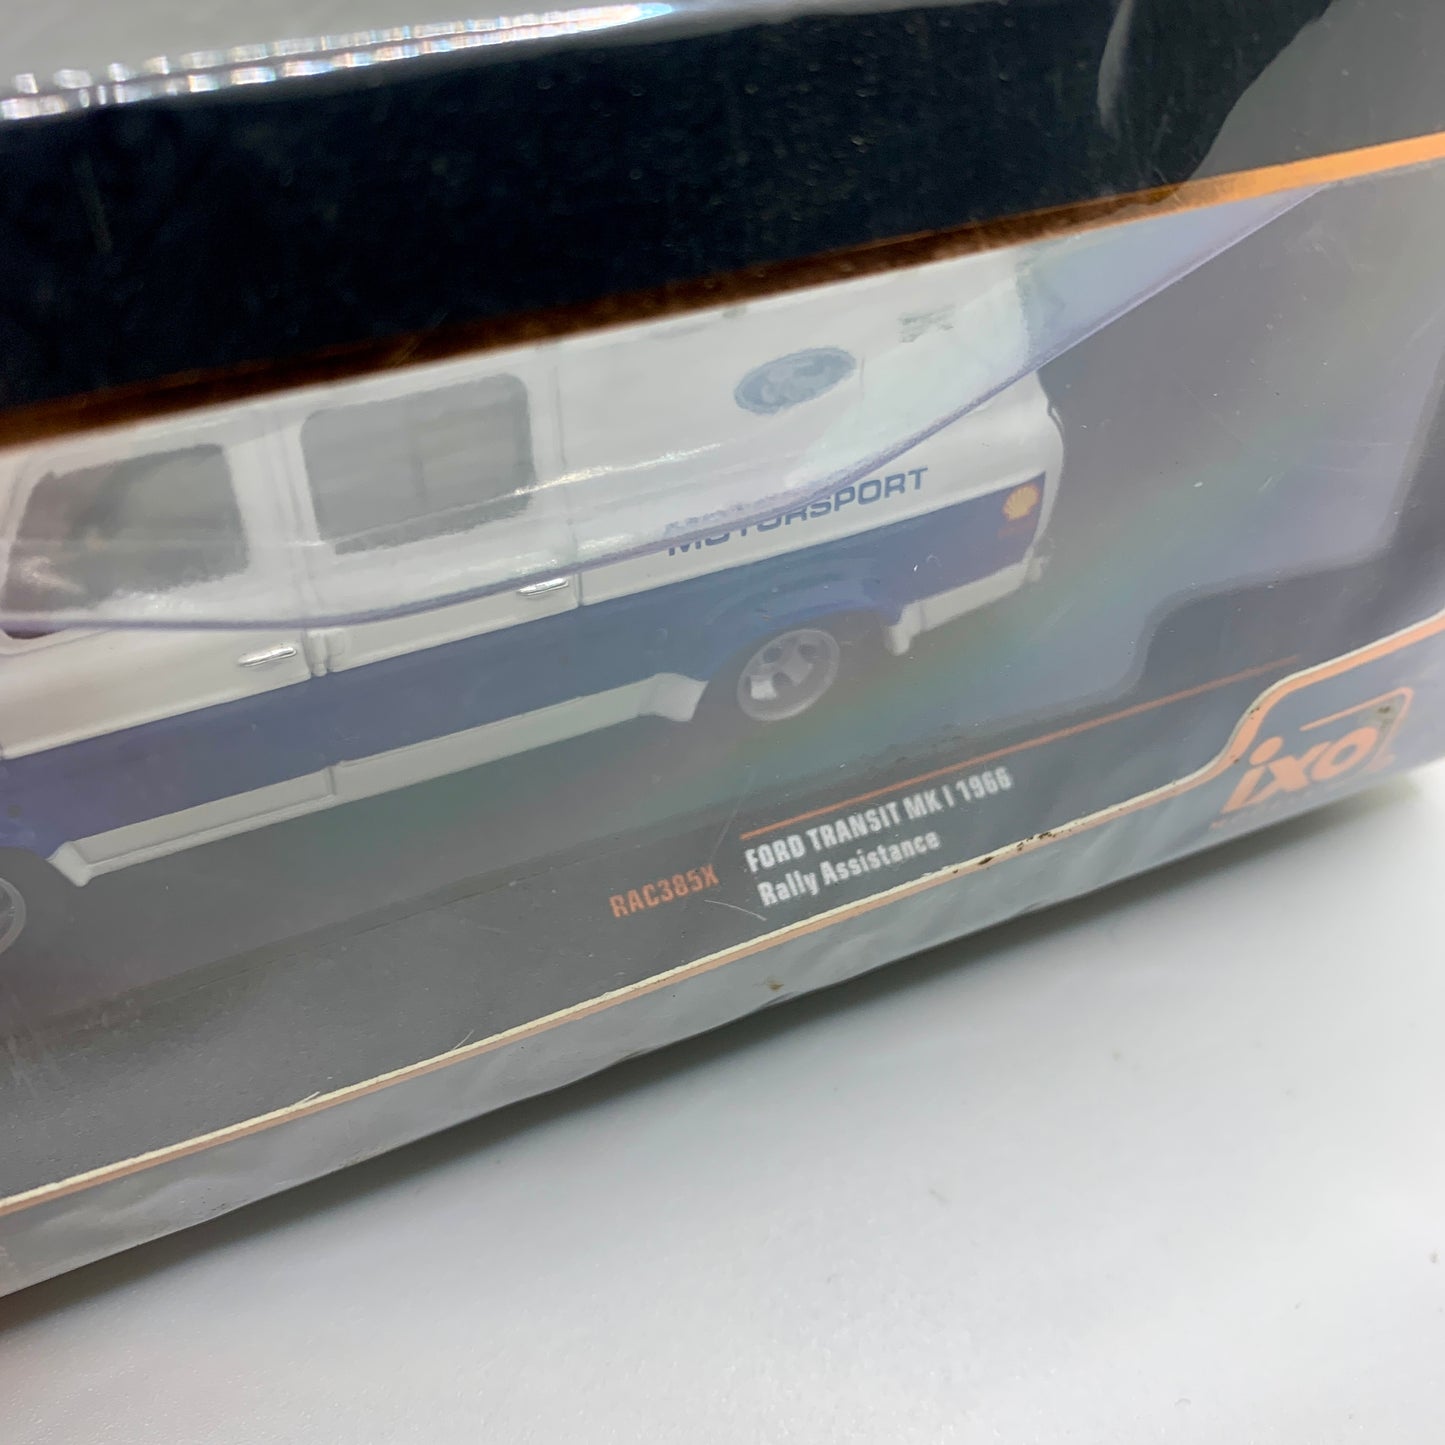 Iconic Ford Transit MK1 1966 1/43 Scale